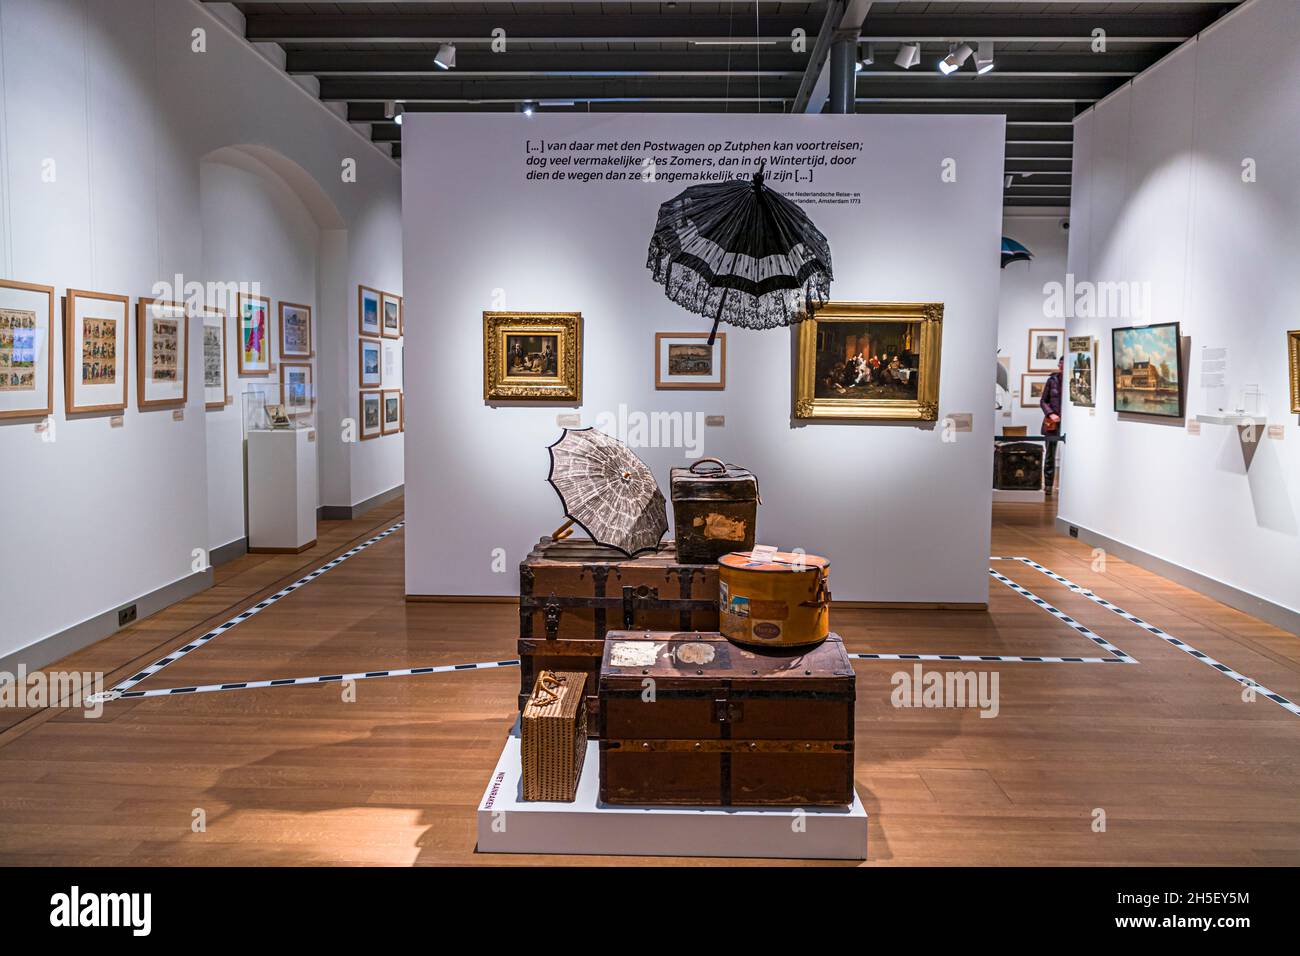 Exibition about Travelling in the Museum of Zutphen, Netherlands Stock Photo